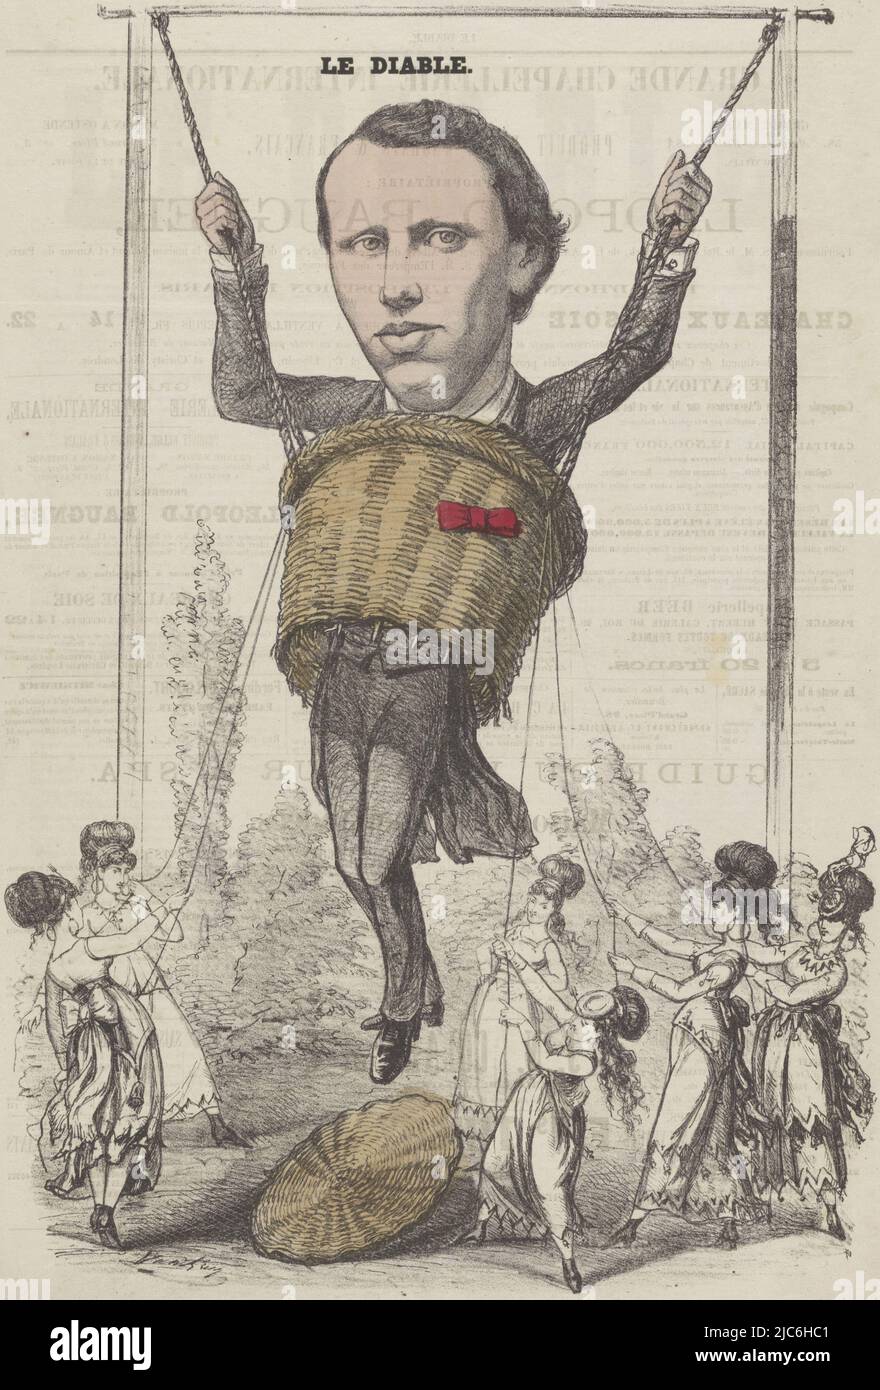 Cartoon on Prince William in the Brussels newspaper 'Le Diable' of 19 July  1868. The prince has sunk through the bottom of a basket on a swing and is  being pulled back